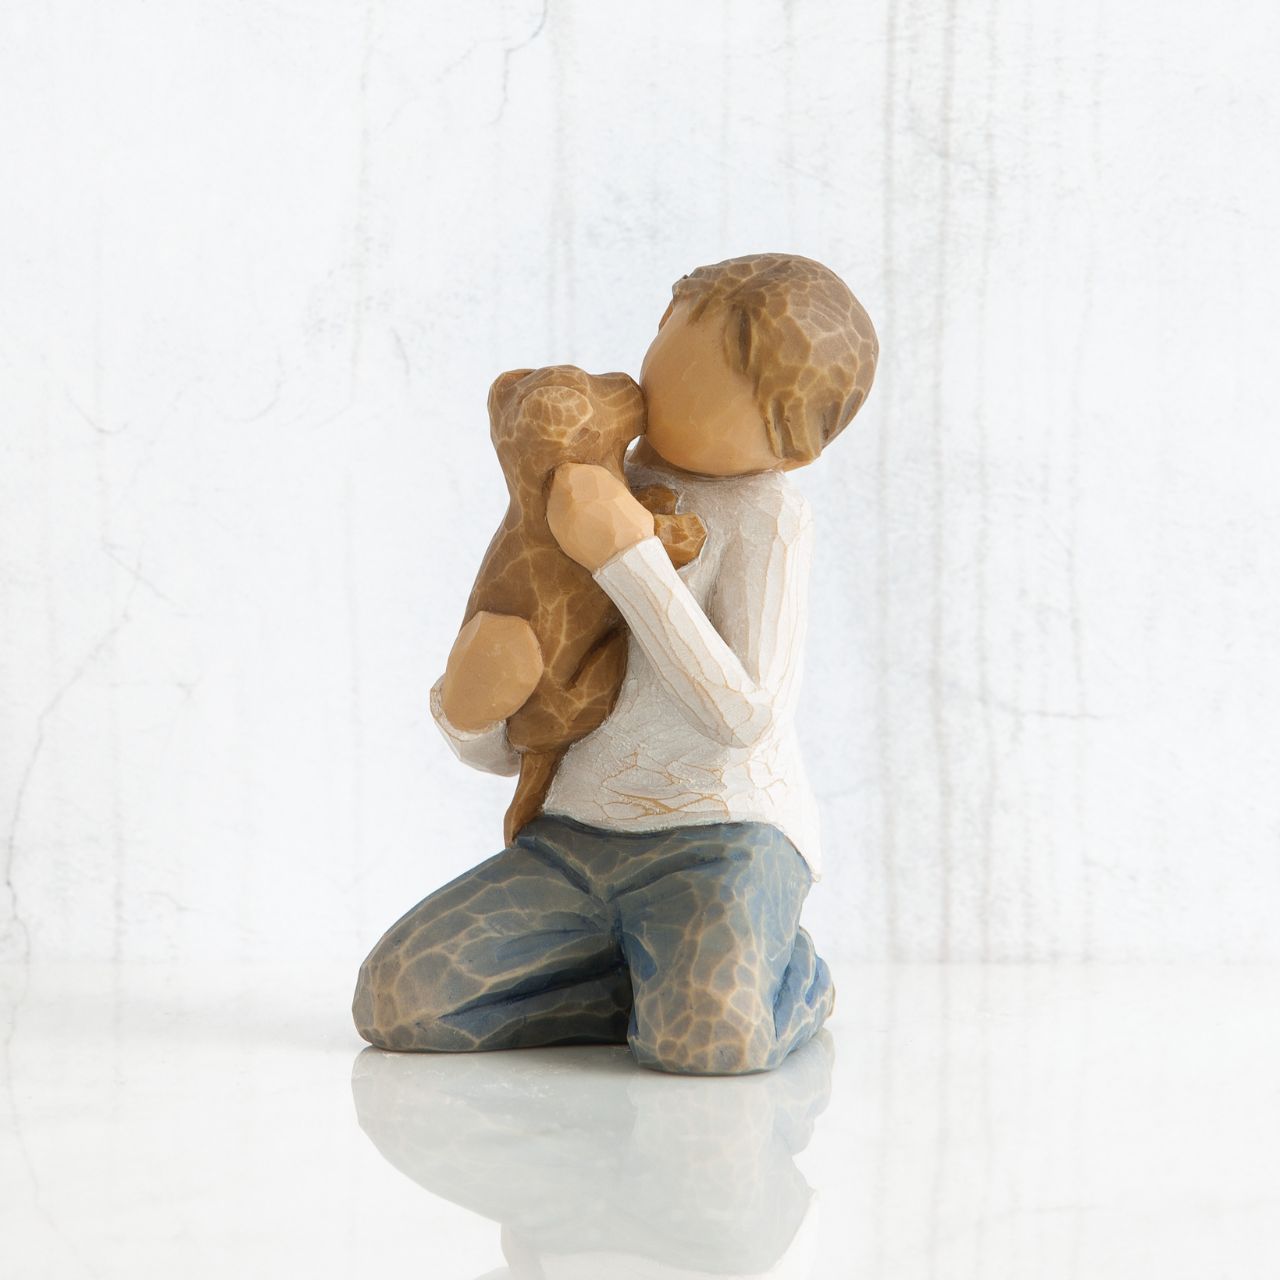 Kindness Boy by Willow Tree  Willow Tree is an intimate line of figurative sculptures representing sentiments of love, closeness, healing, courage, hope...all the emotions we encounter in life. "...Kindness is a virtue that gives us so much reward, and one we aspire to.